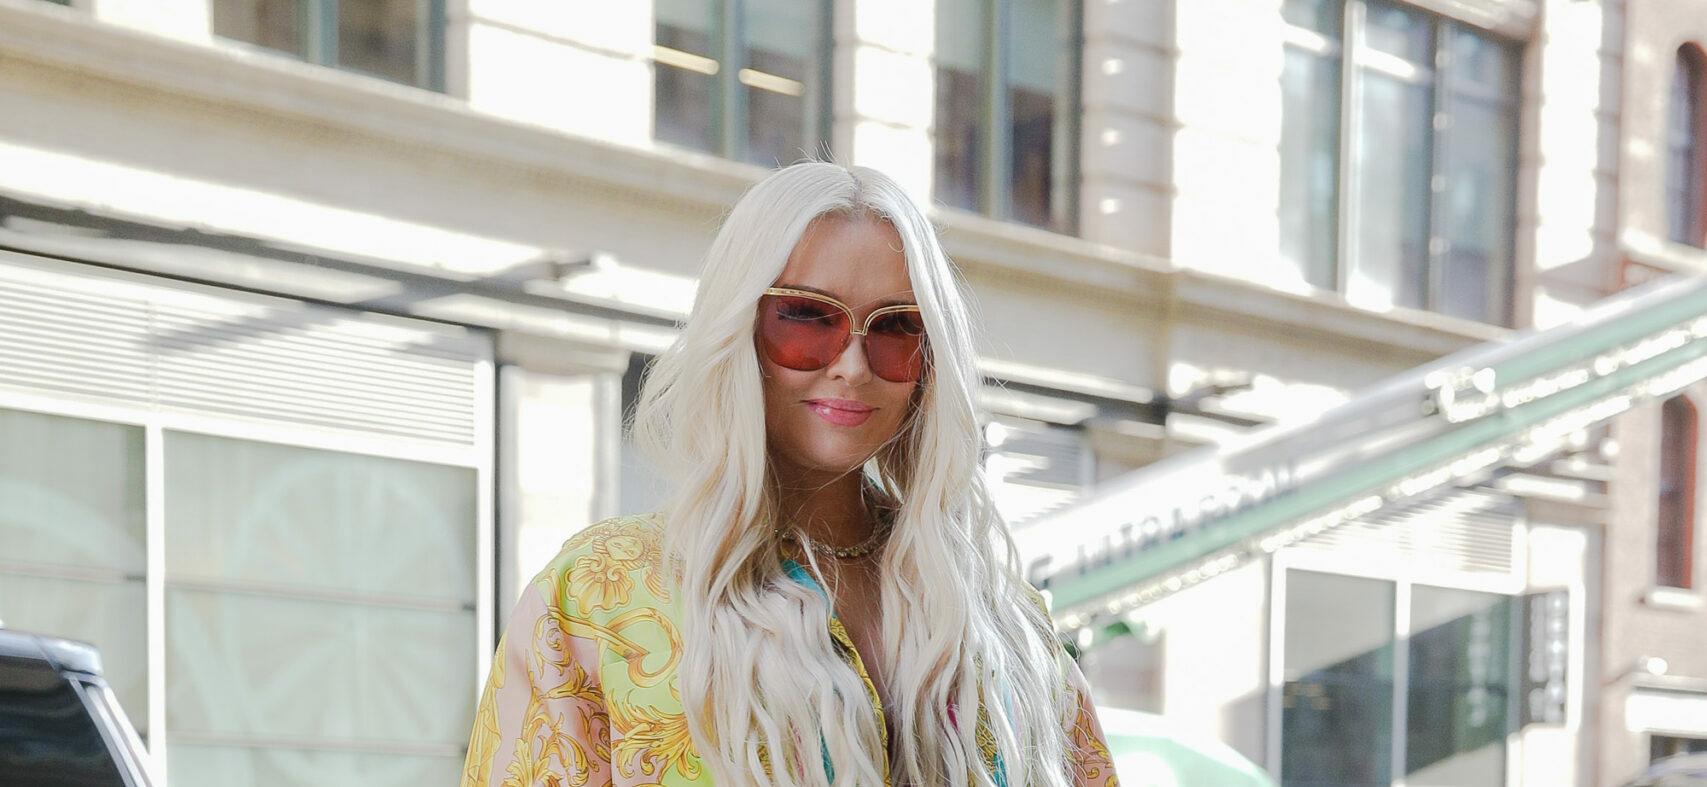 Erika Jayne arrives at WWHL Studios in New York City on May 17 2022